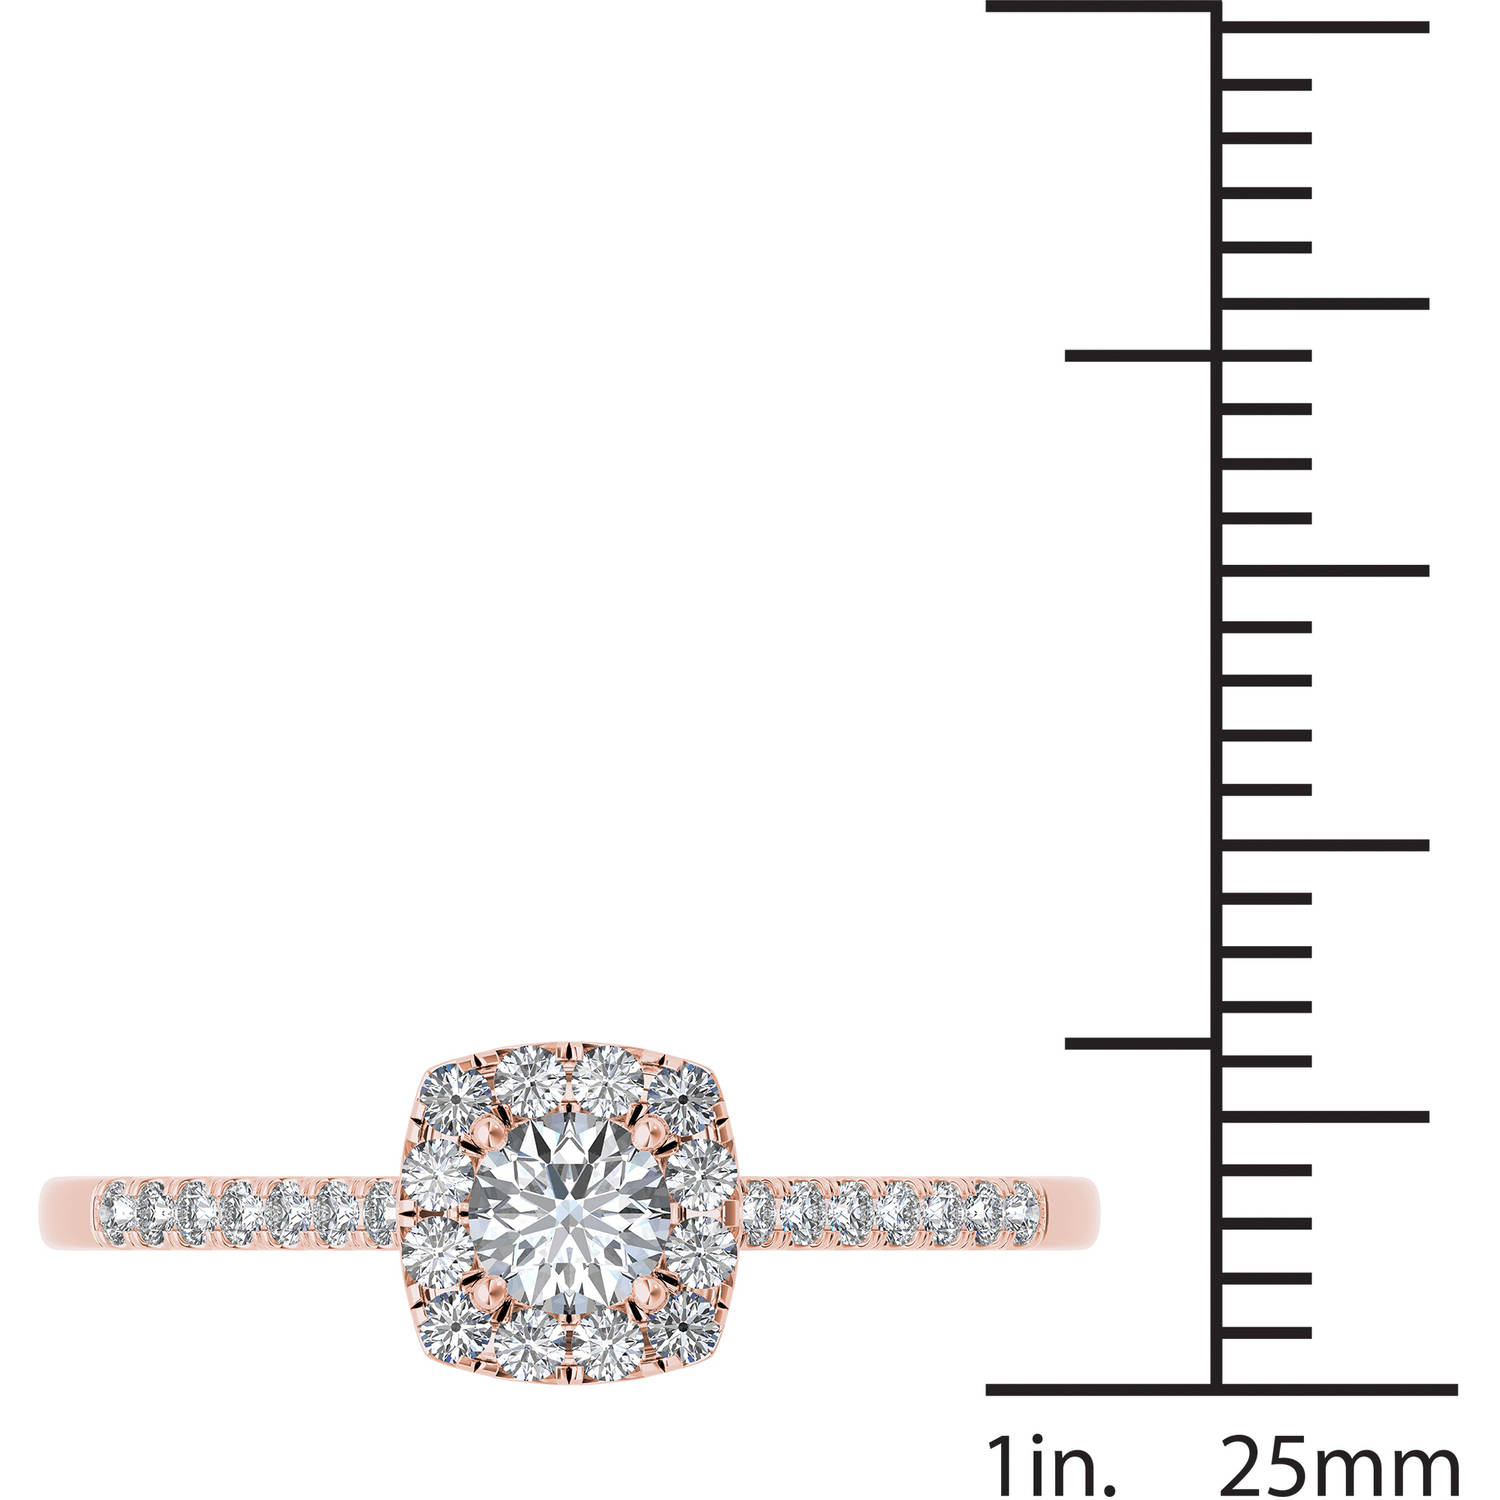 In Love By Brides 3/8ct Tw Diamond Cushi - image 5 of 7